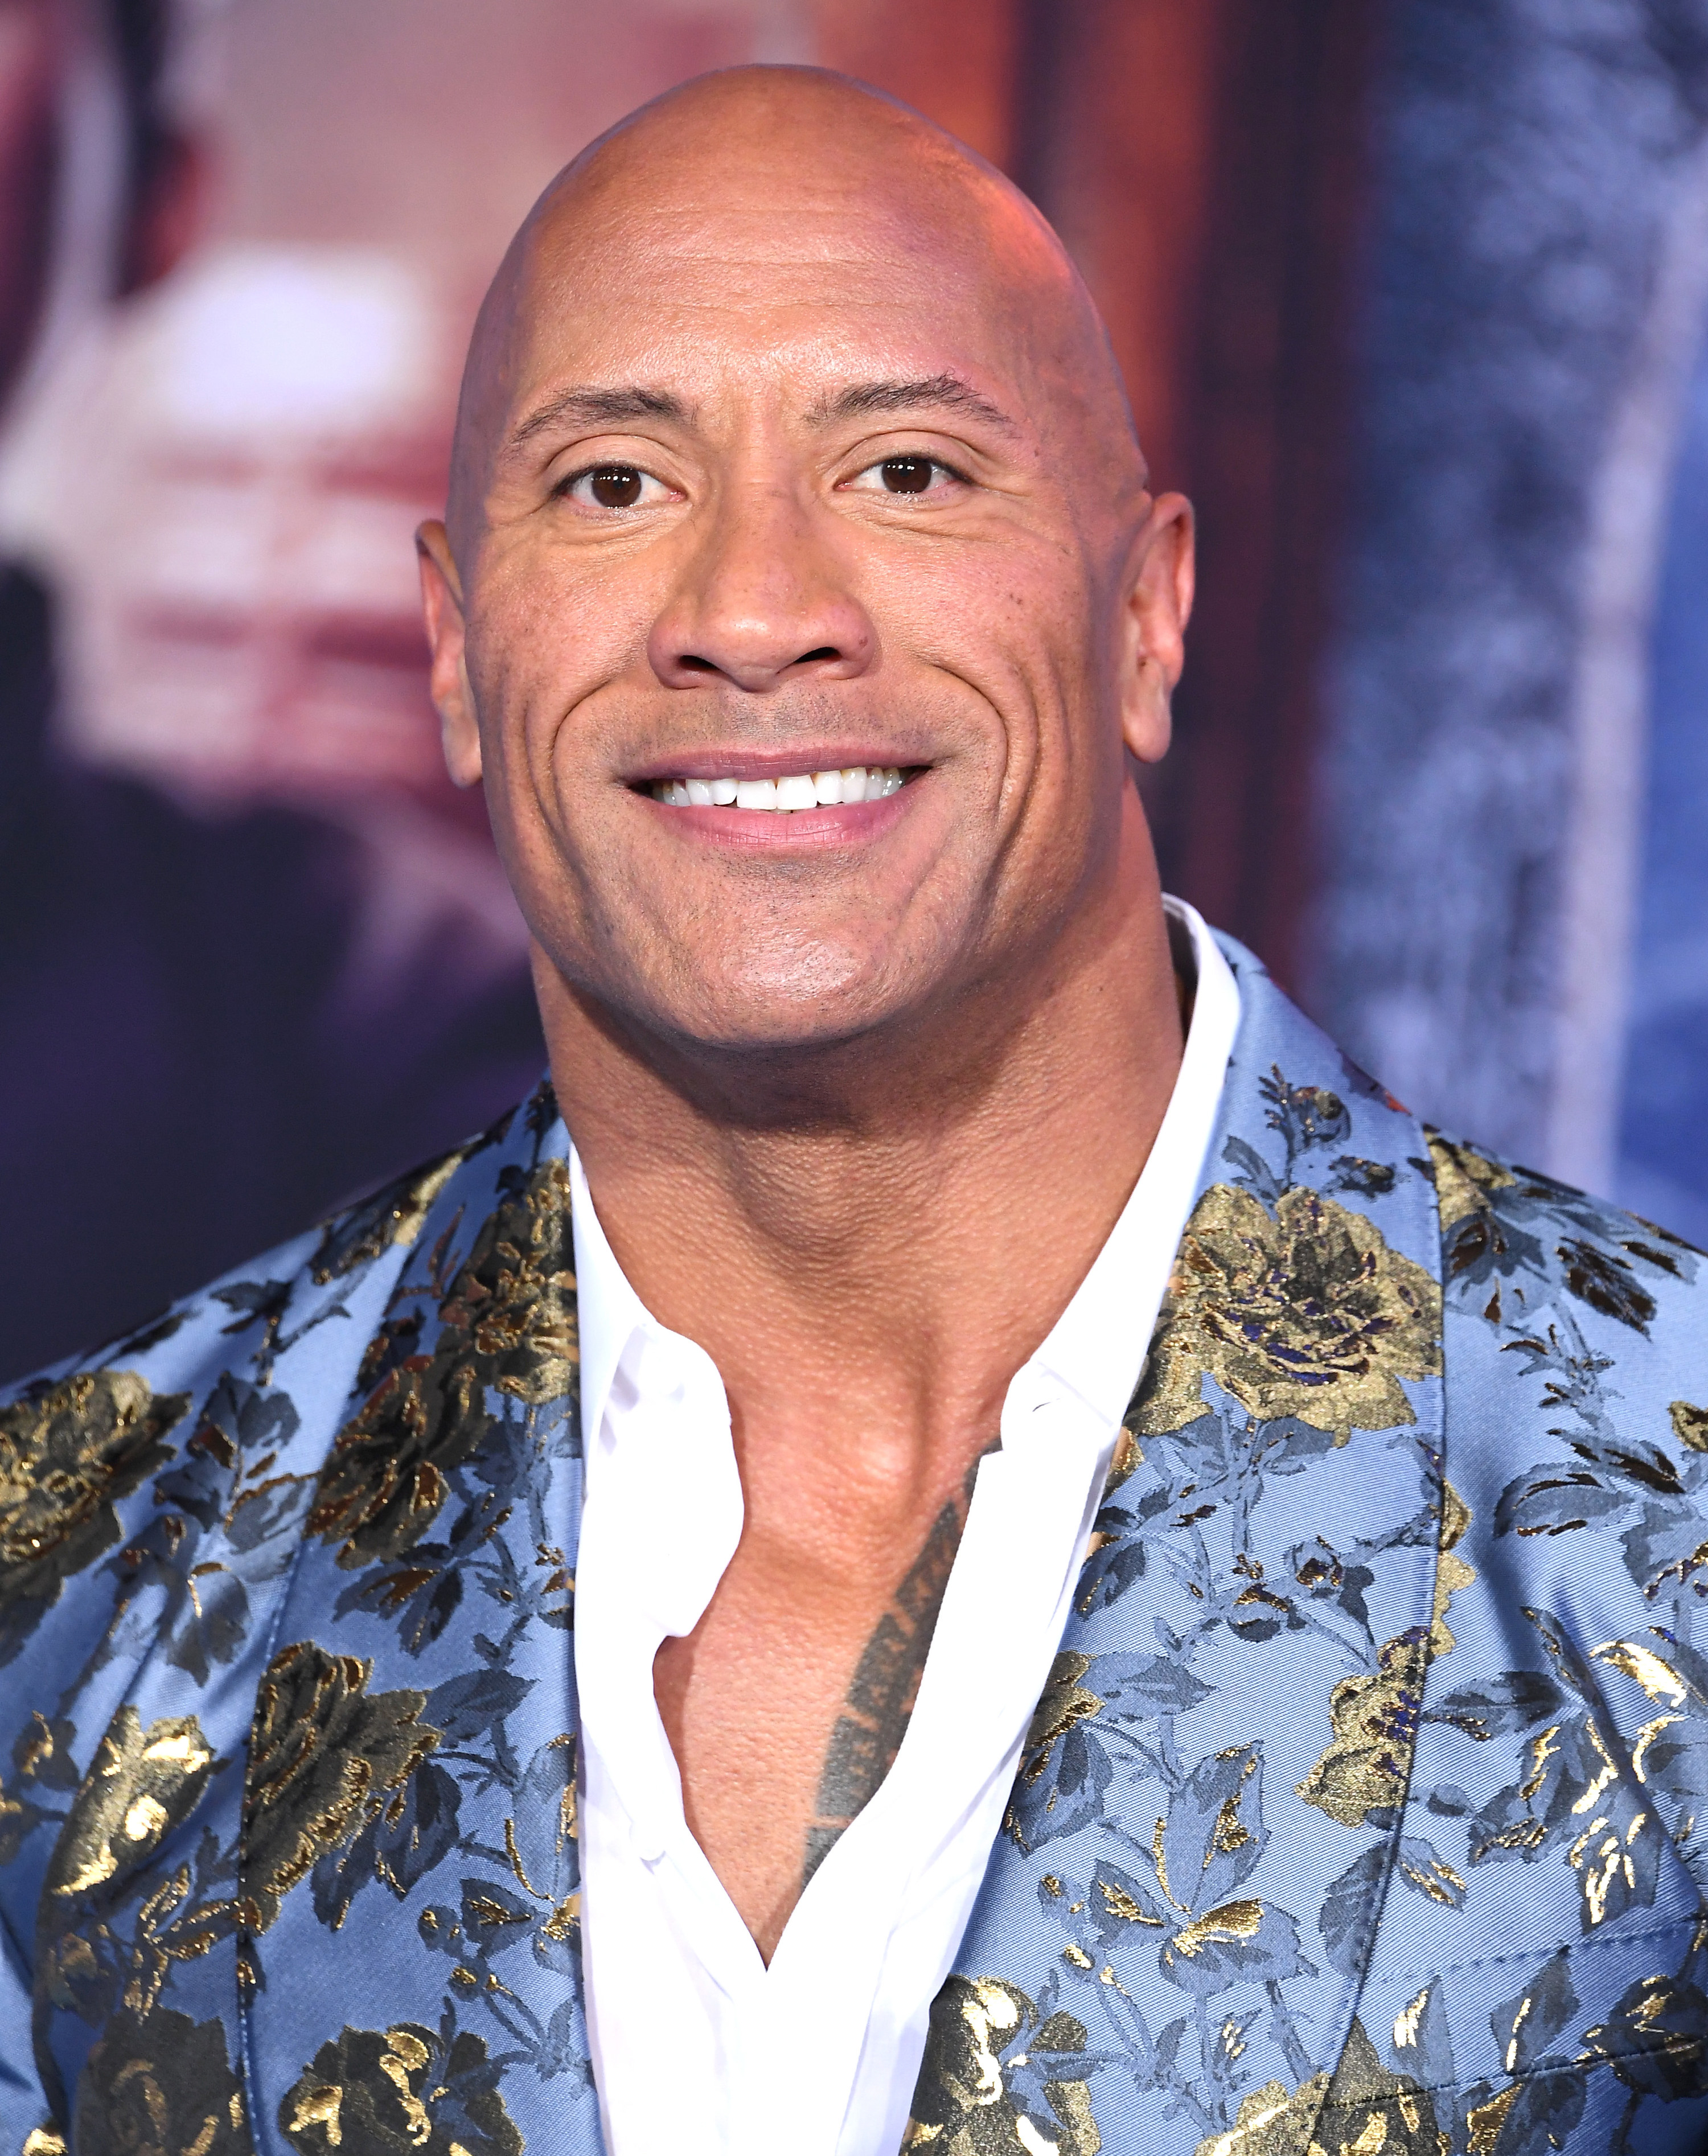 The Rock smiling as he wears a blue suit jacket with gold roses on it